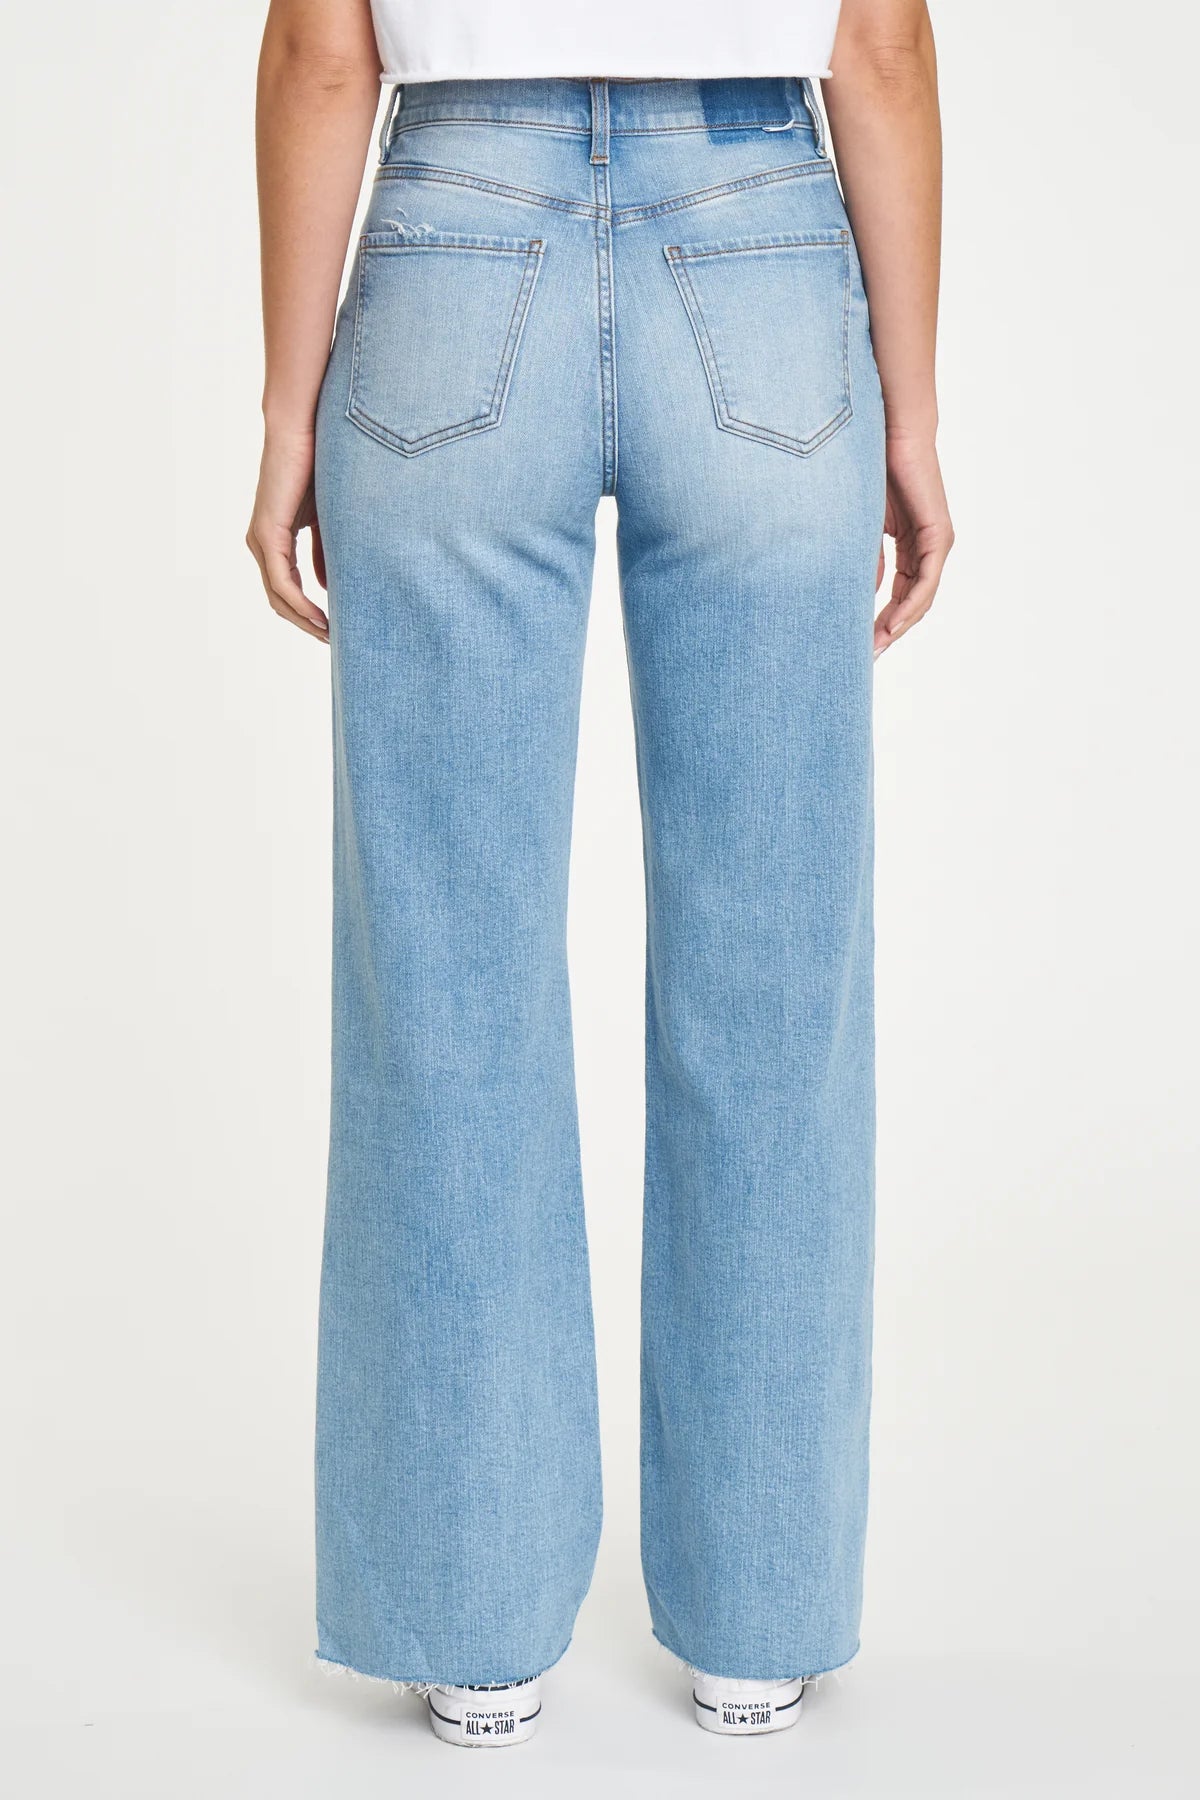 Far Out High Rise Relaxed Flare Denim by Daze